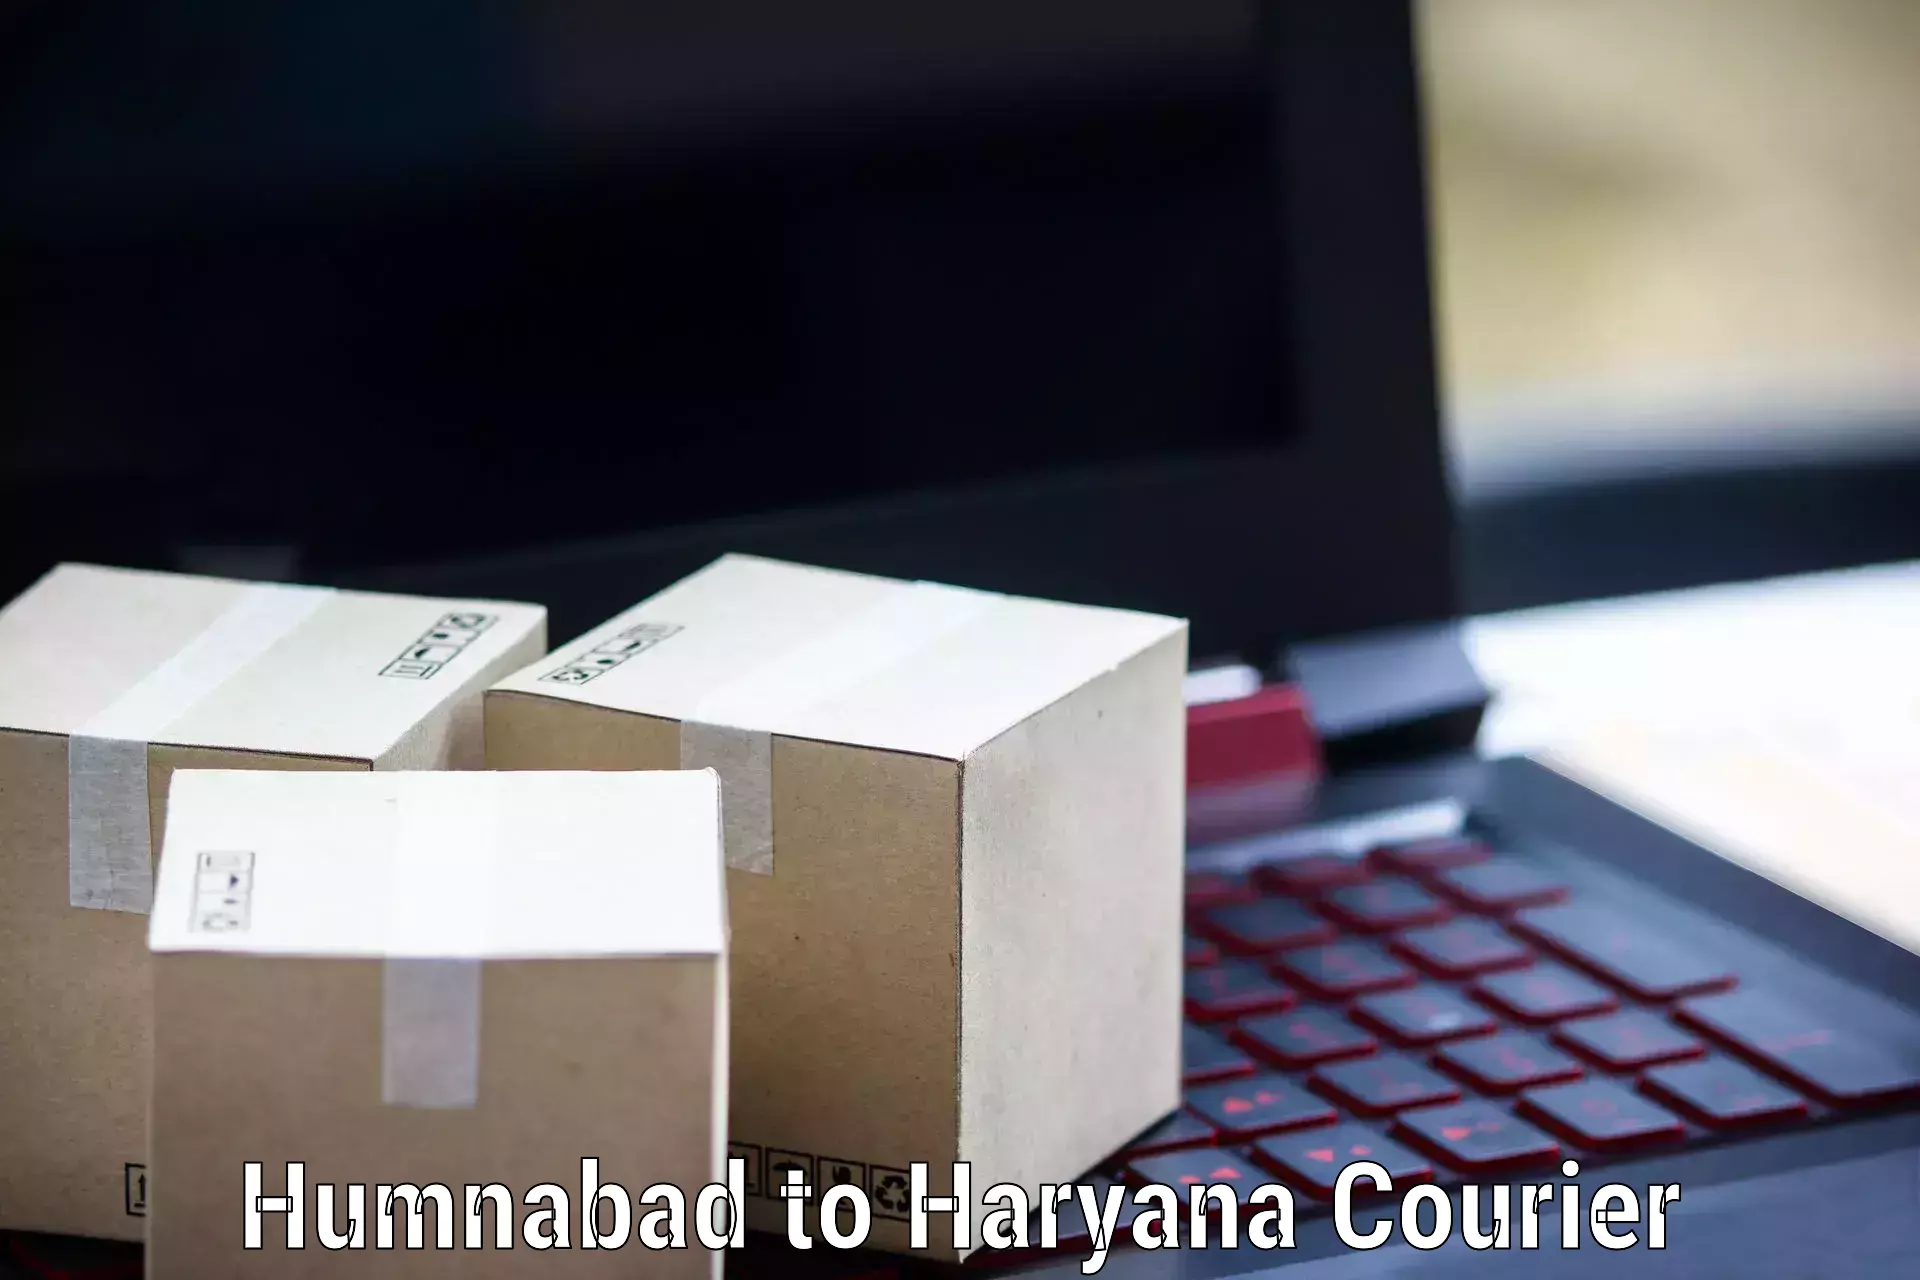 Fragile item shipping in Humnabad to NCR Haryana